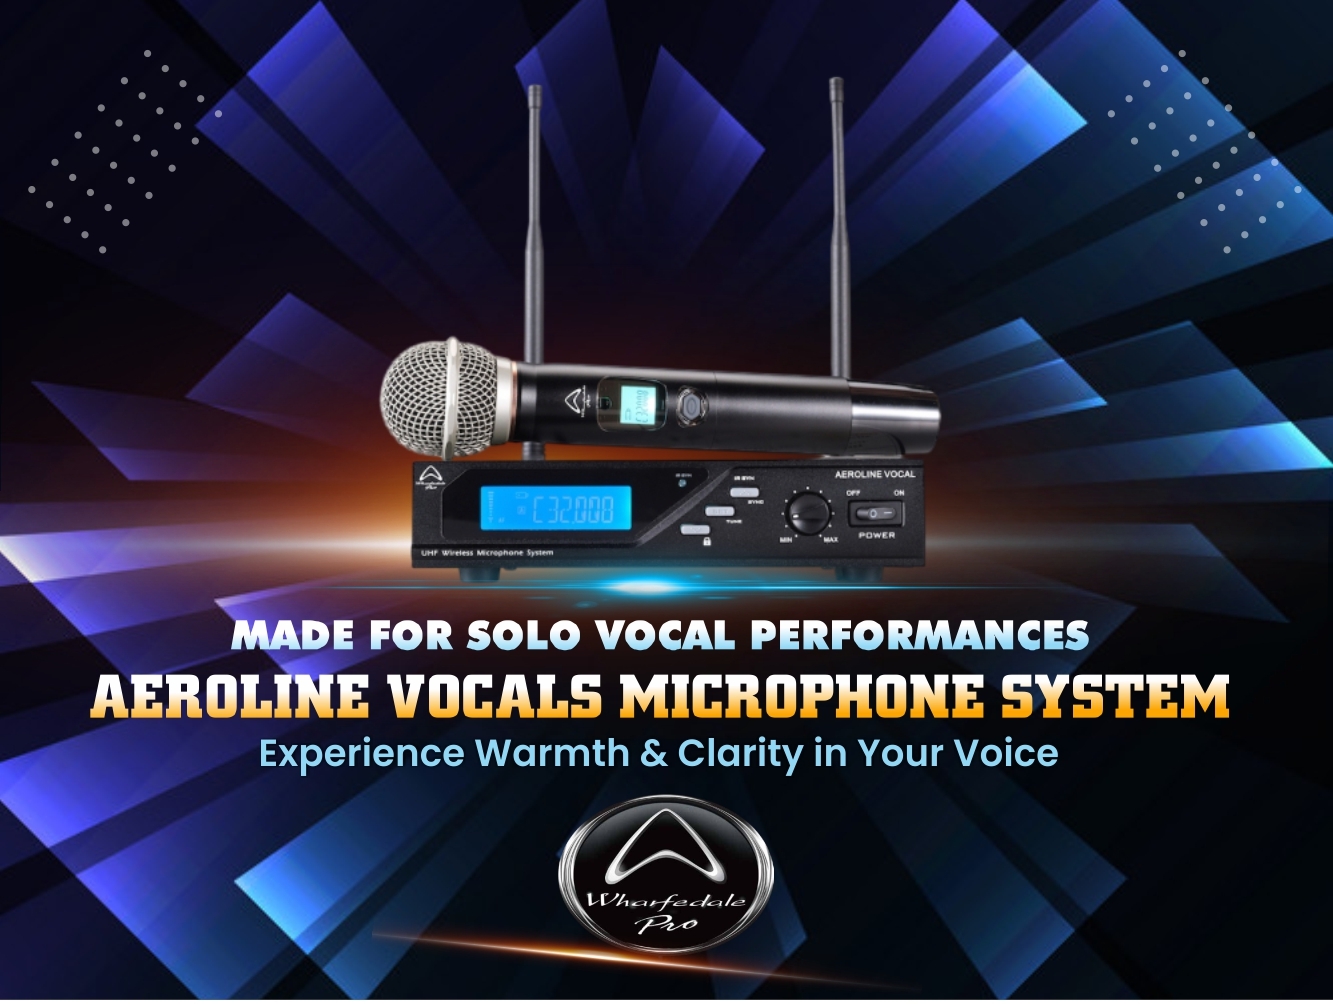 Experience Warmth & Clarity in Your Voice With the Wharfedale Aeroline Vocals